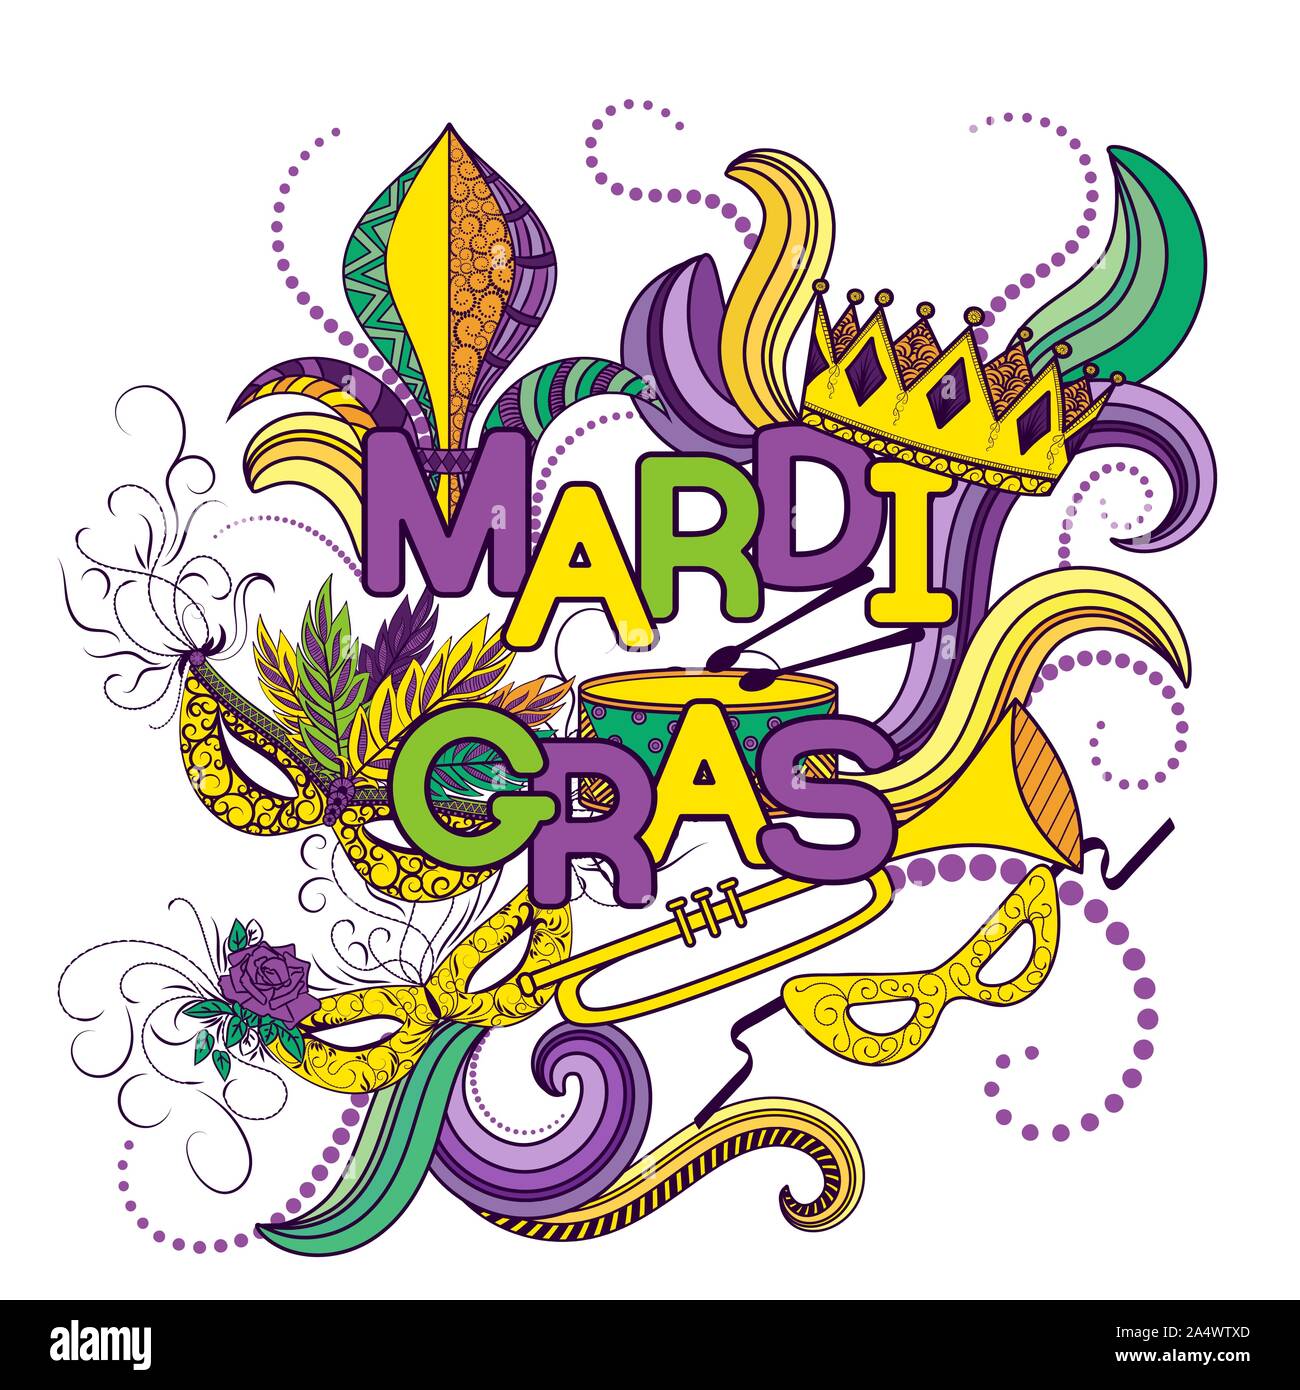 Mardi Gras or Shrove Tuesday. Colorful background with carnival mask and hats, jester's hat, crowns, fleur de lis, feathers and ribbons. Vector illustration Stock Vector